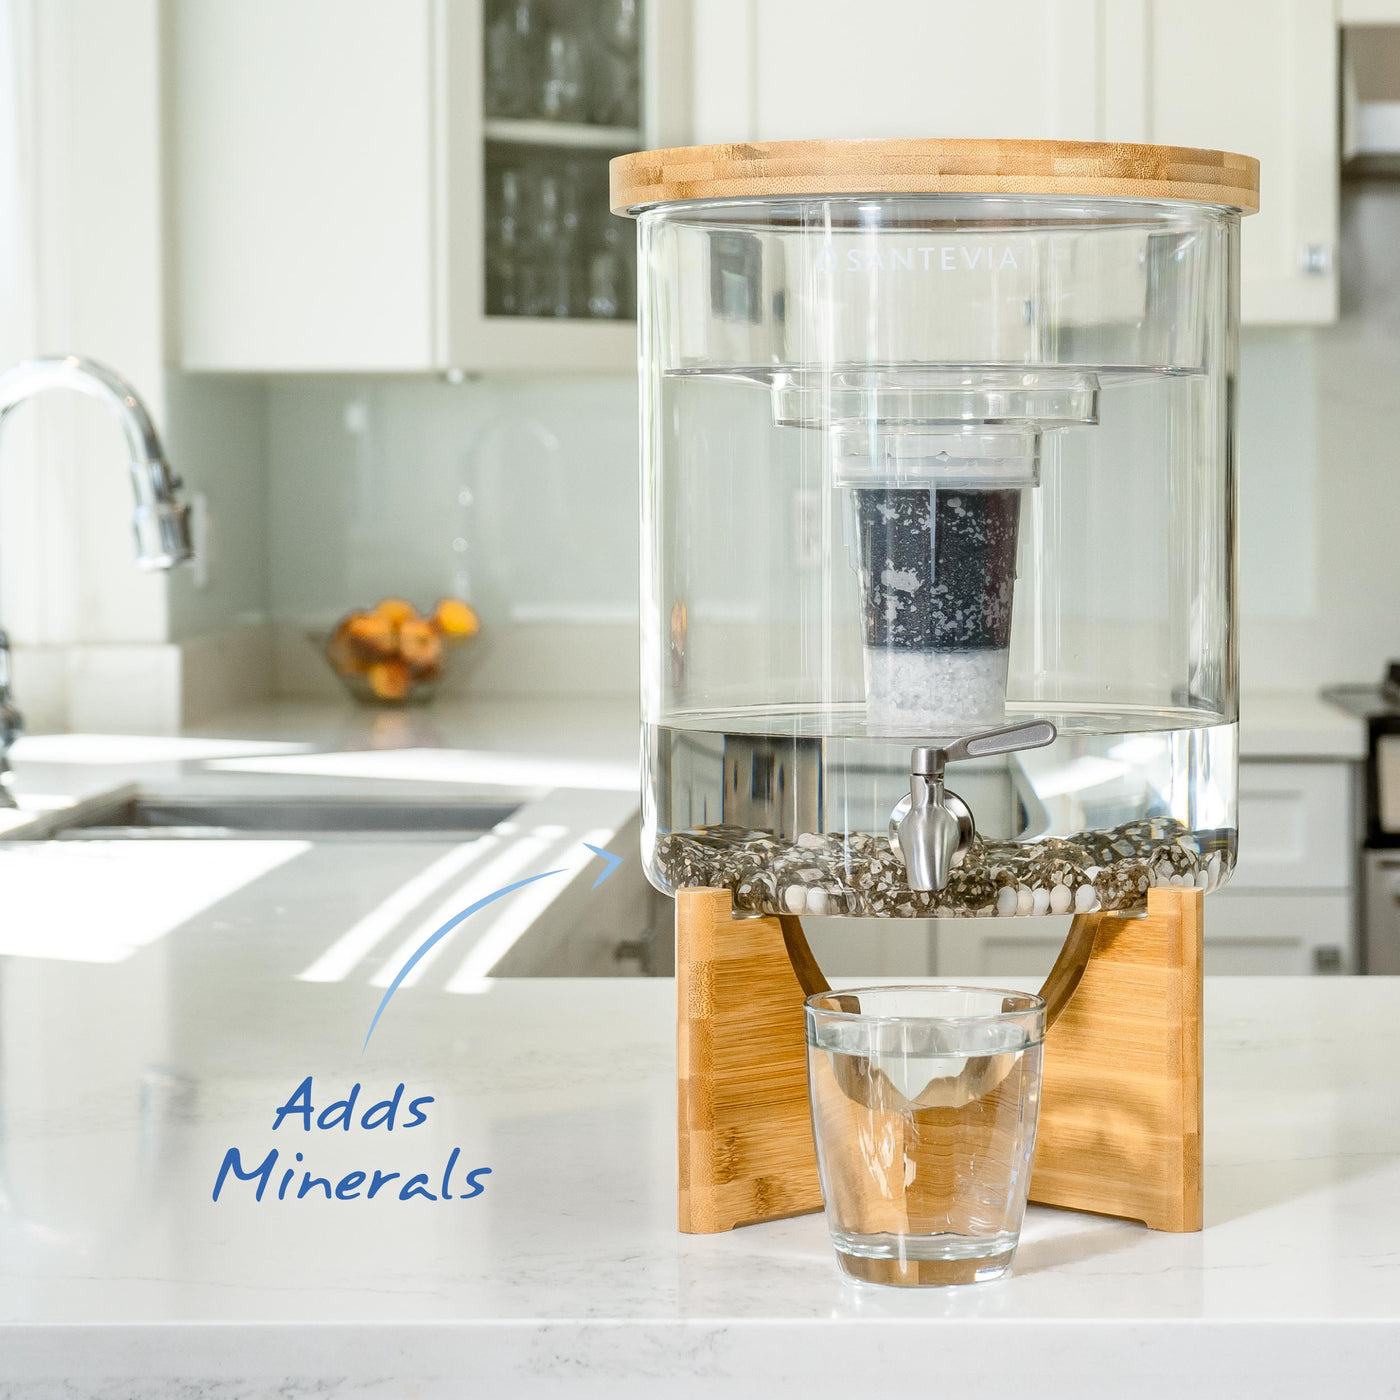 The Santevia Glass Water System Adds Healthy Minerals to your water